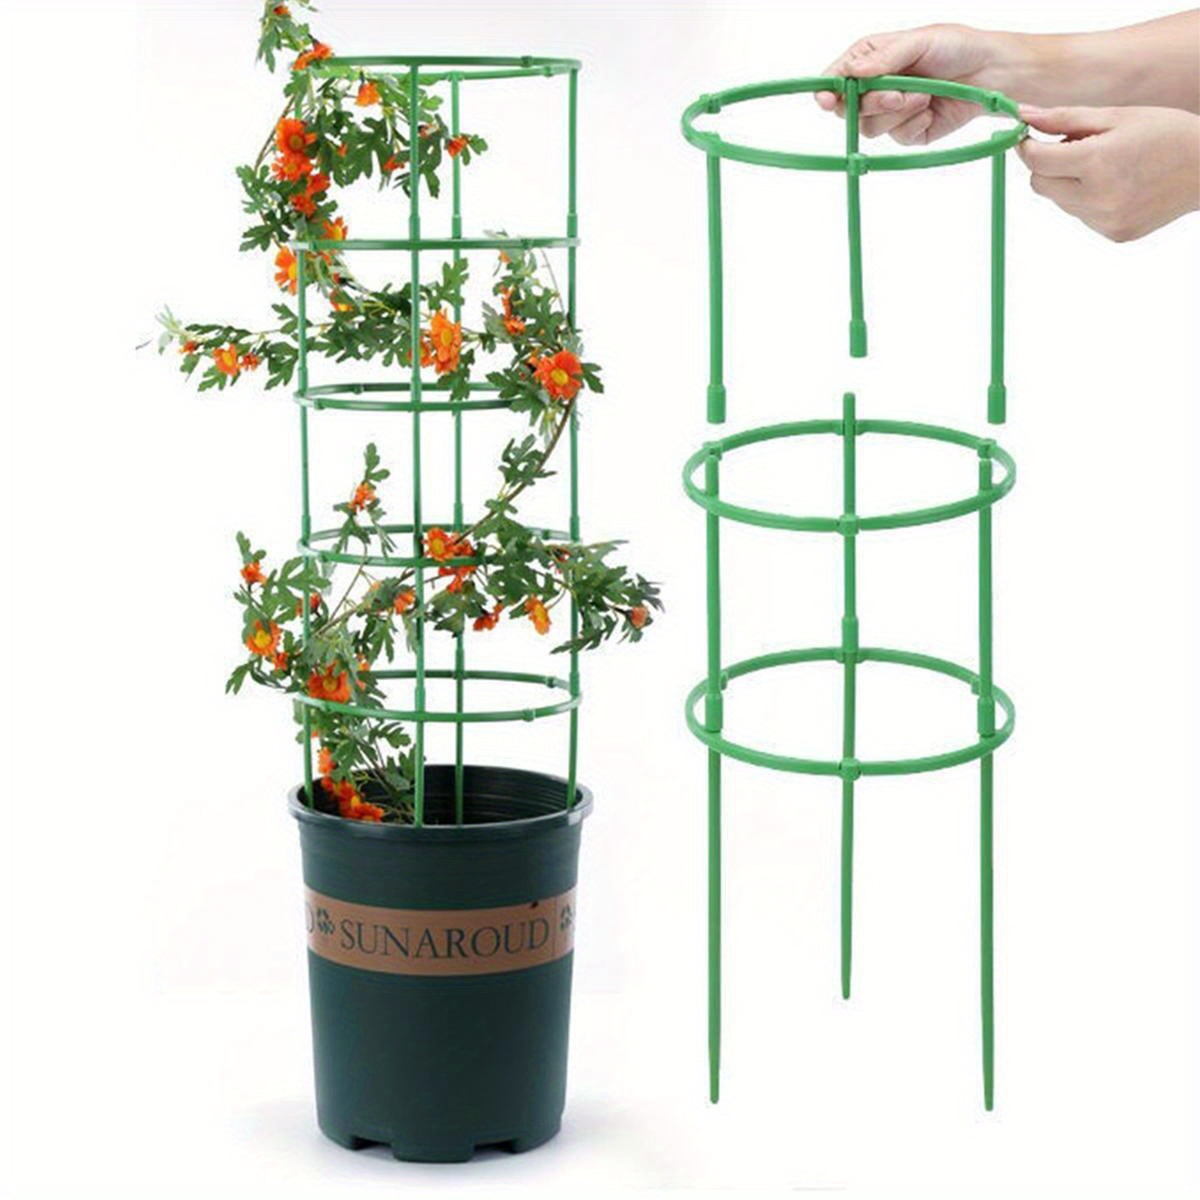 

24 Pcs Stackable Plastic Plant Support Rings - 4 Layer Garden Flower Pot Cages & Supports - Potted Plant Stakes For Climbing Plants And Flowers